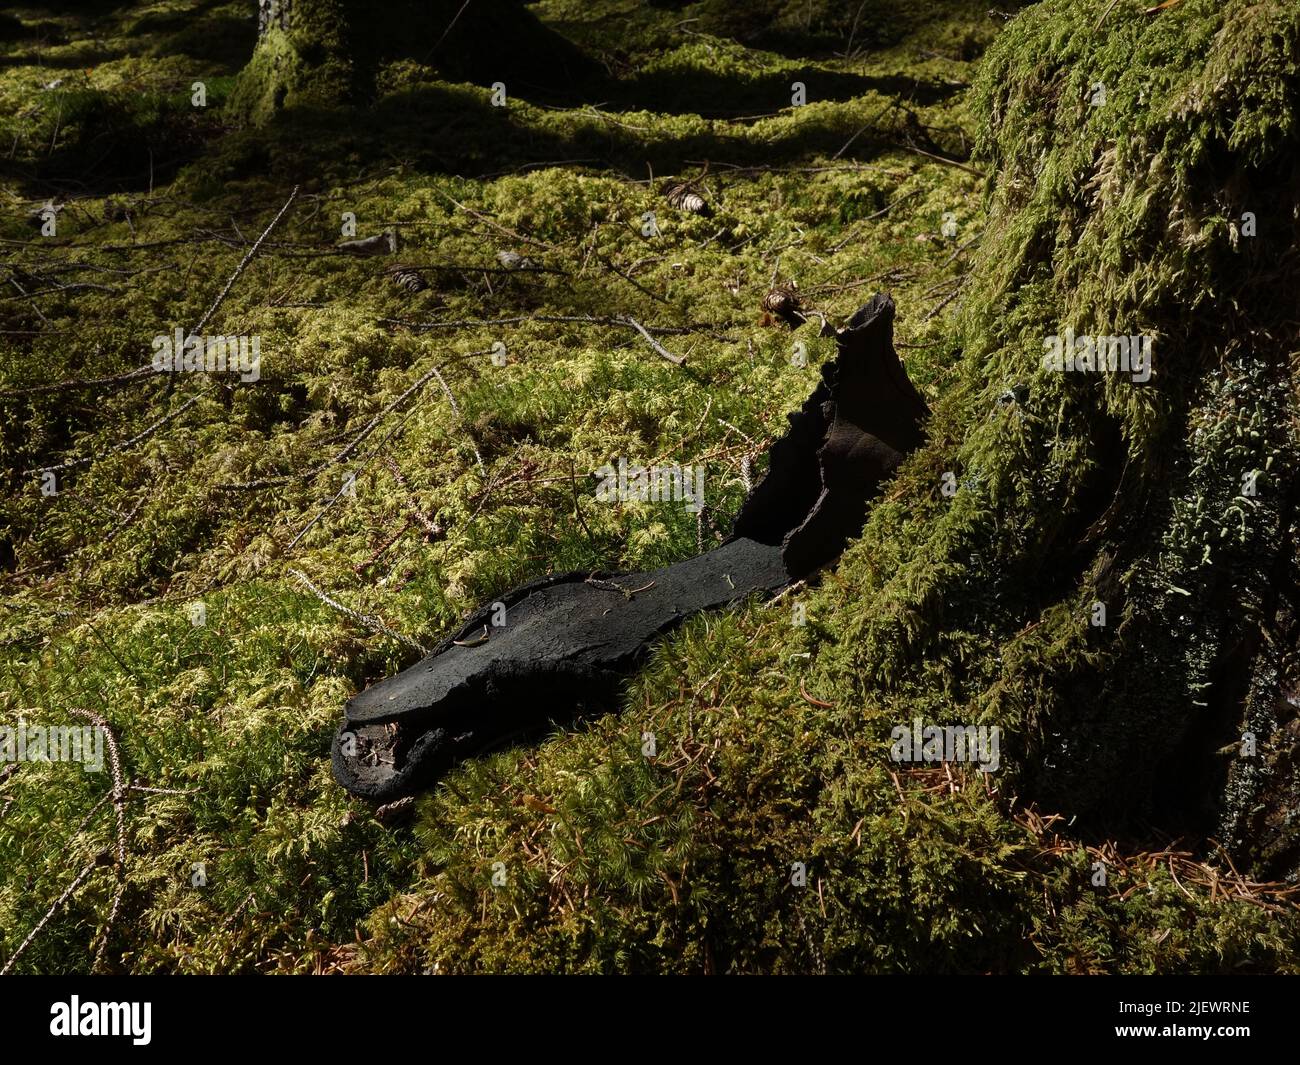 An worn-out shoe sole, left behind in the woods. Stock Photo